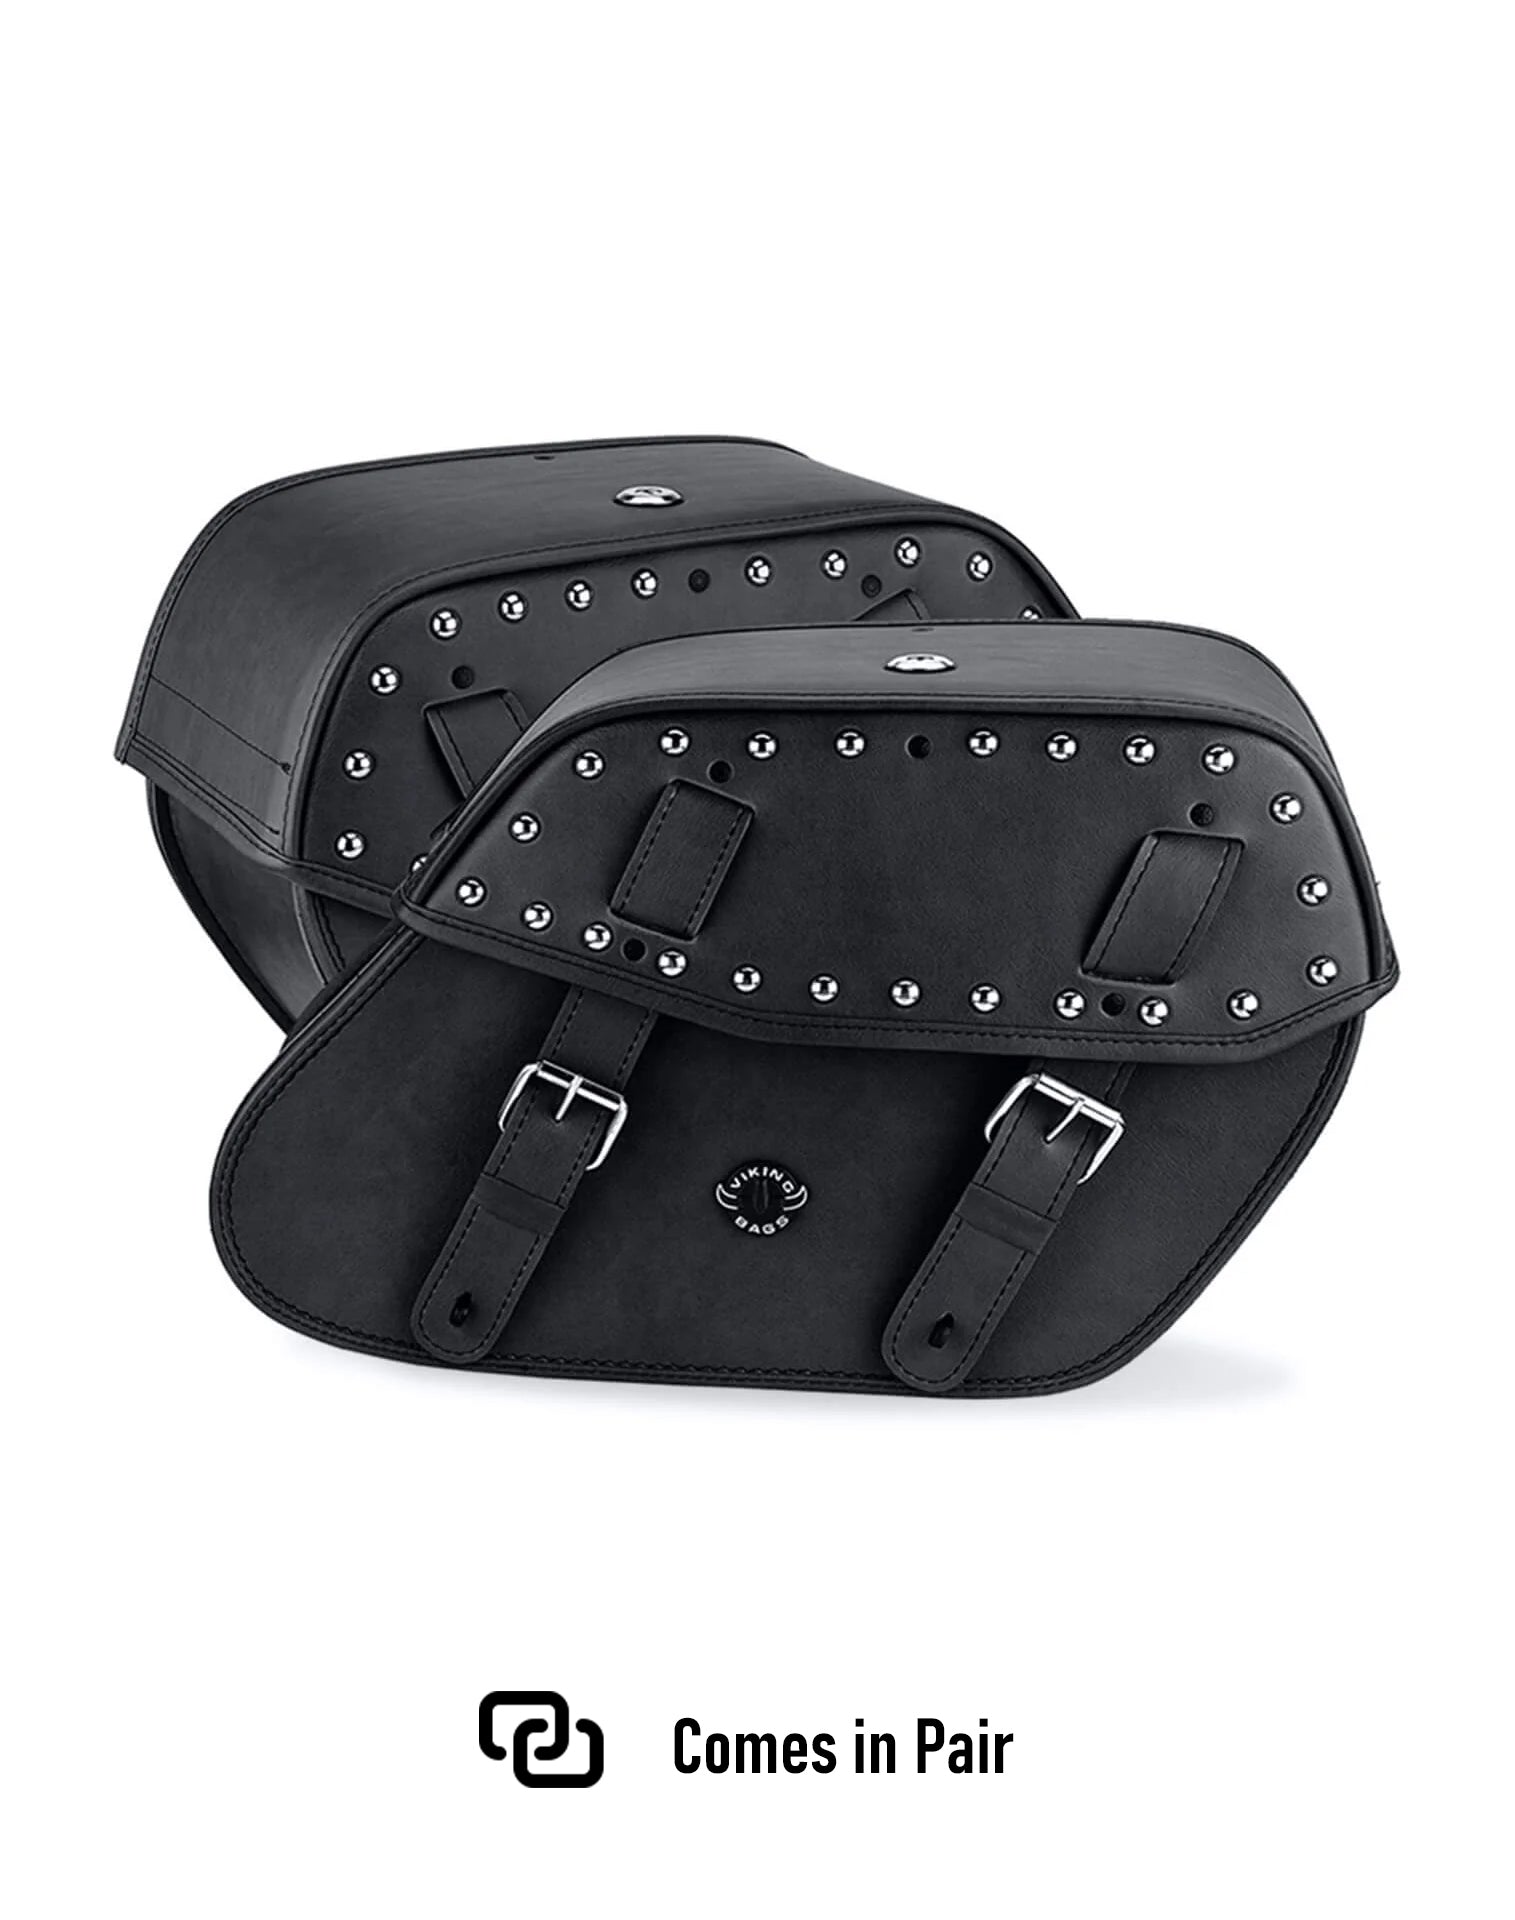 Viking Odin Large Triumph Speedmaster Studded Leather Motorcycle Saddlebags Weather Resistant Bags Comes in Pair